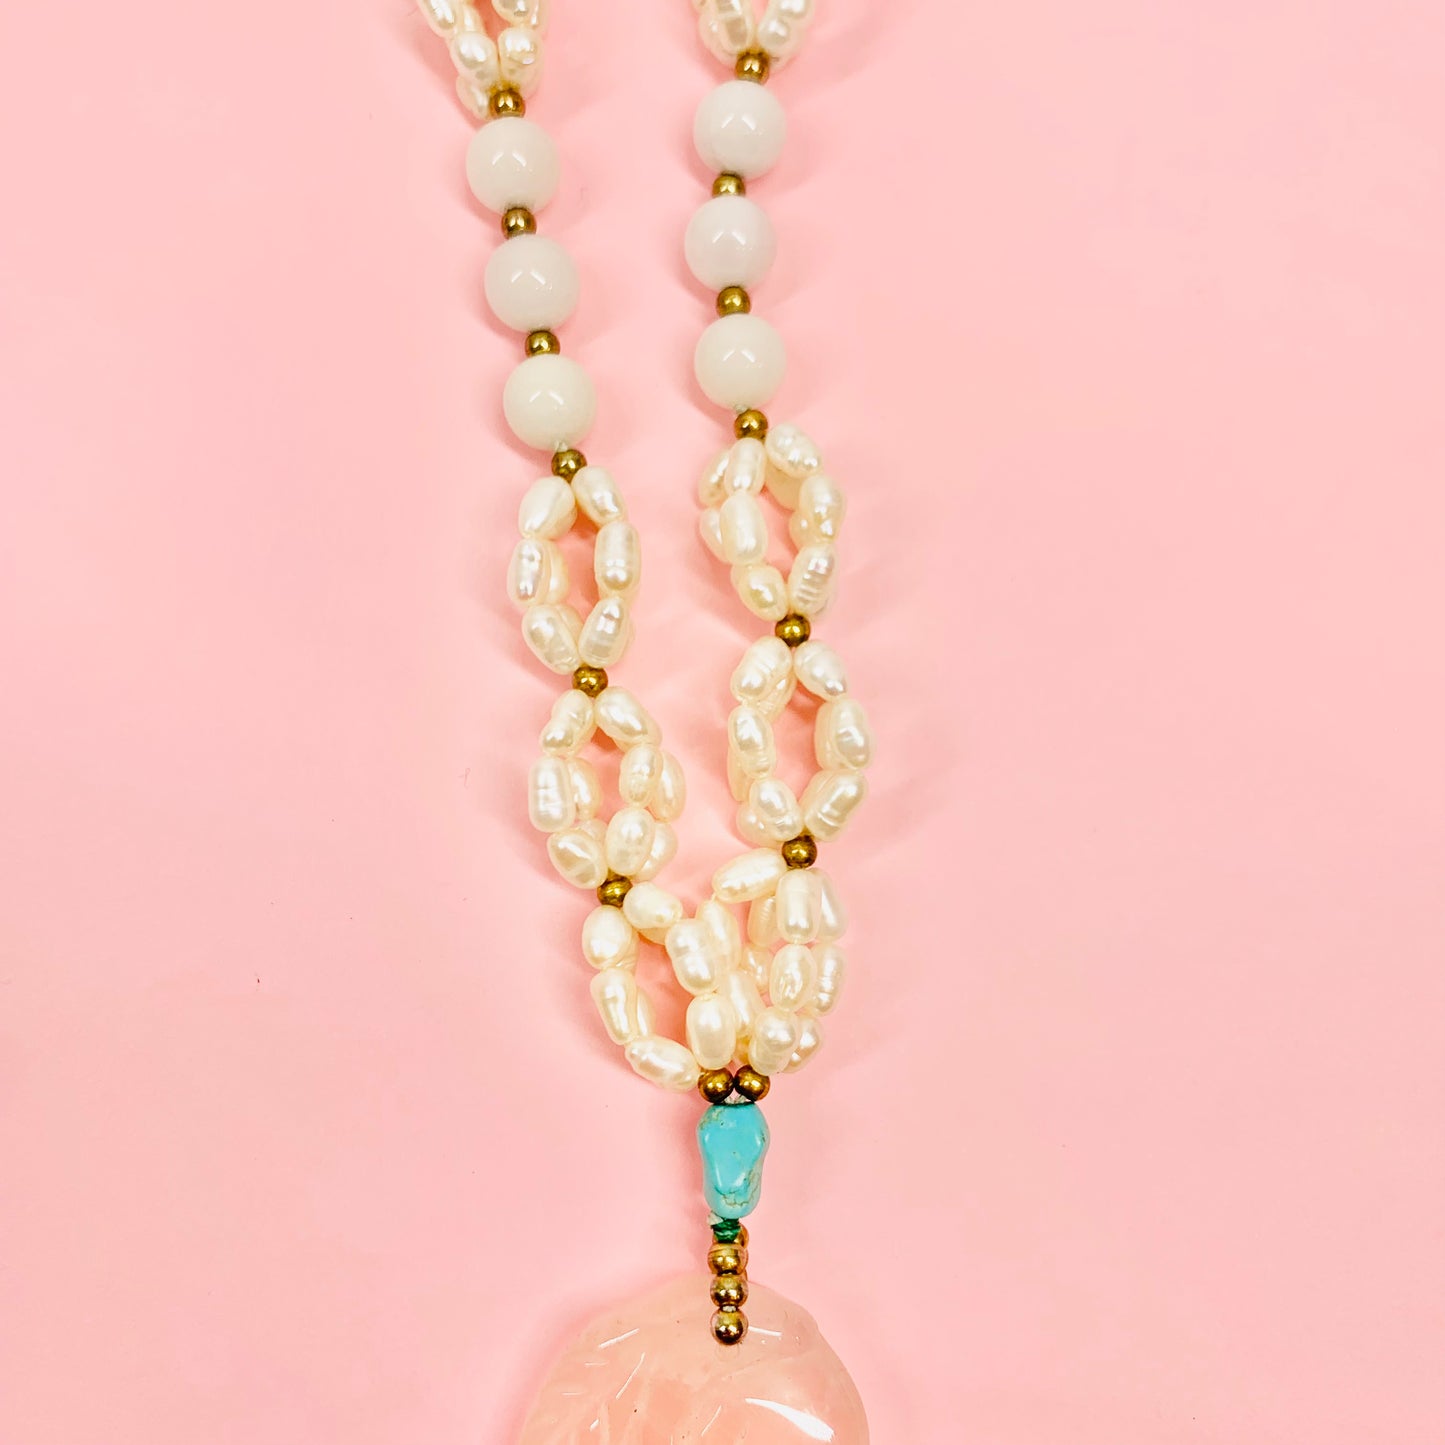 Vintage fresh water pearl & stone beads necklace with hand carved rose quartz pendant